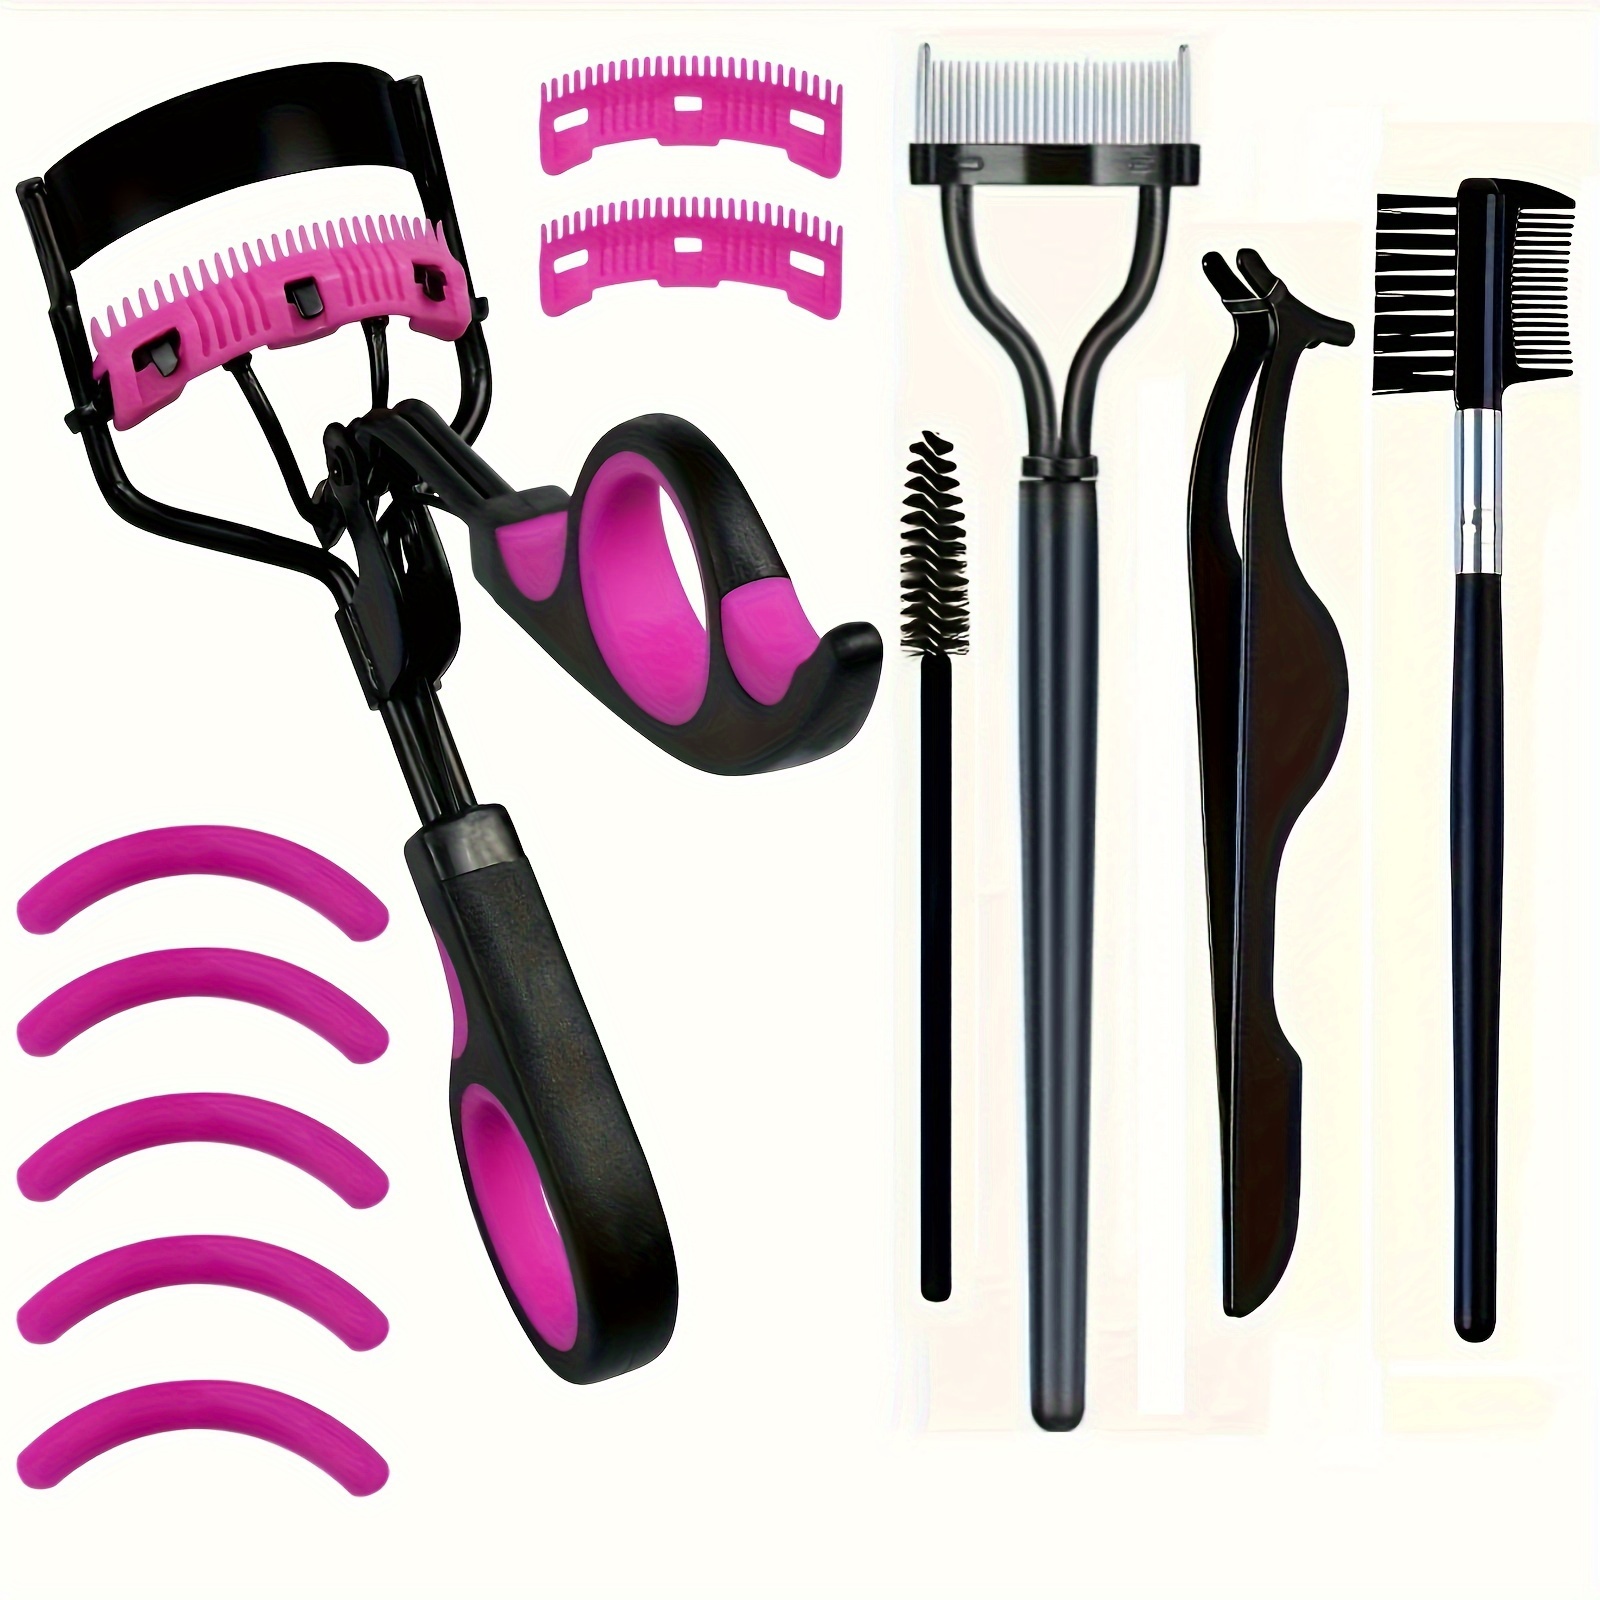 

8-piece Eyelash Curling Kit, Eyelash Curler, 5 Refill Pads, 2 Combs, Beauty Tool For Lashes